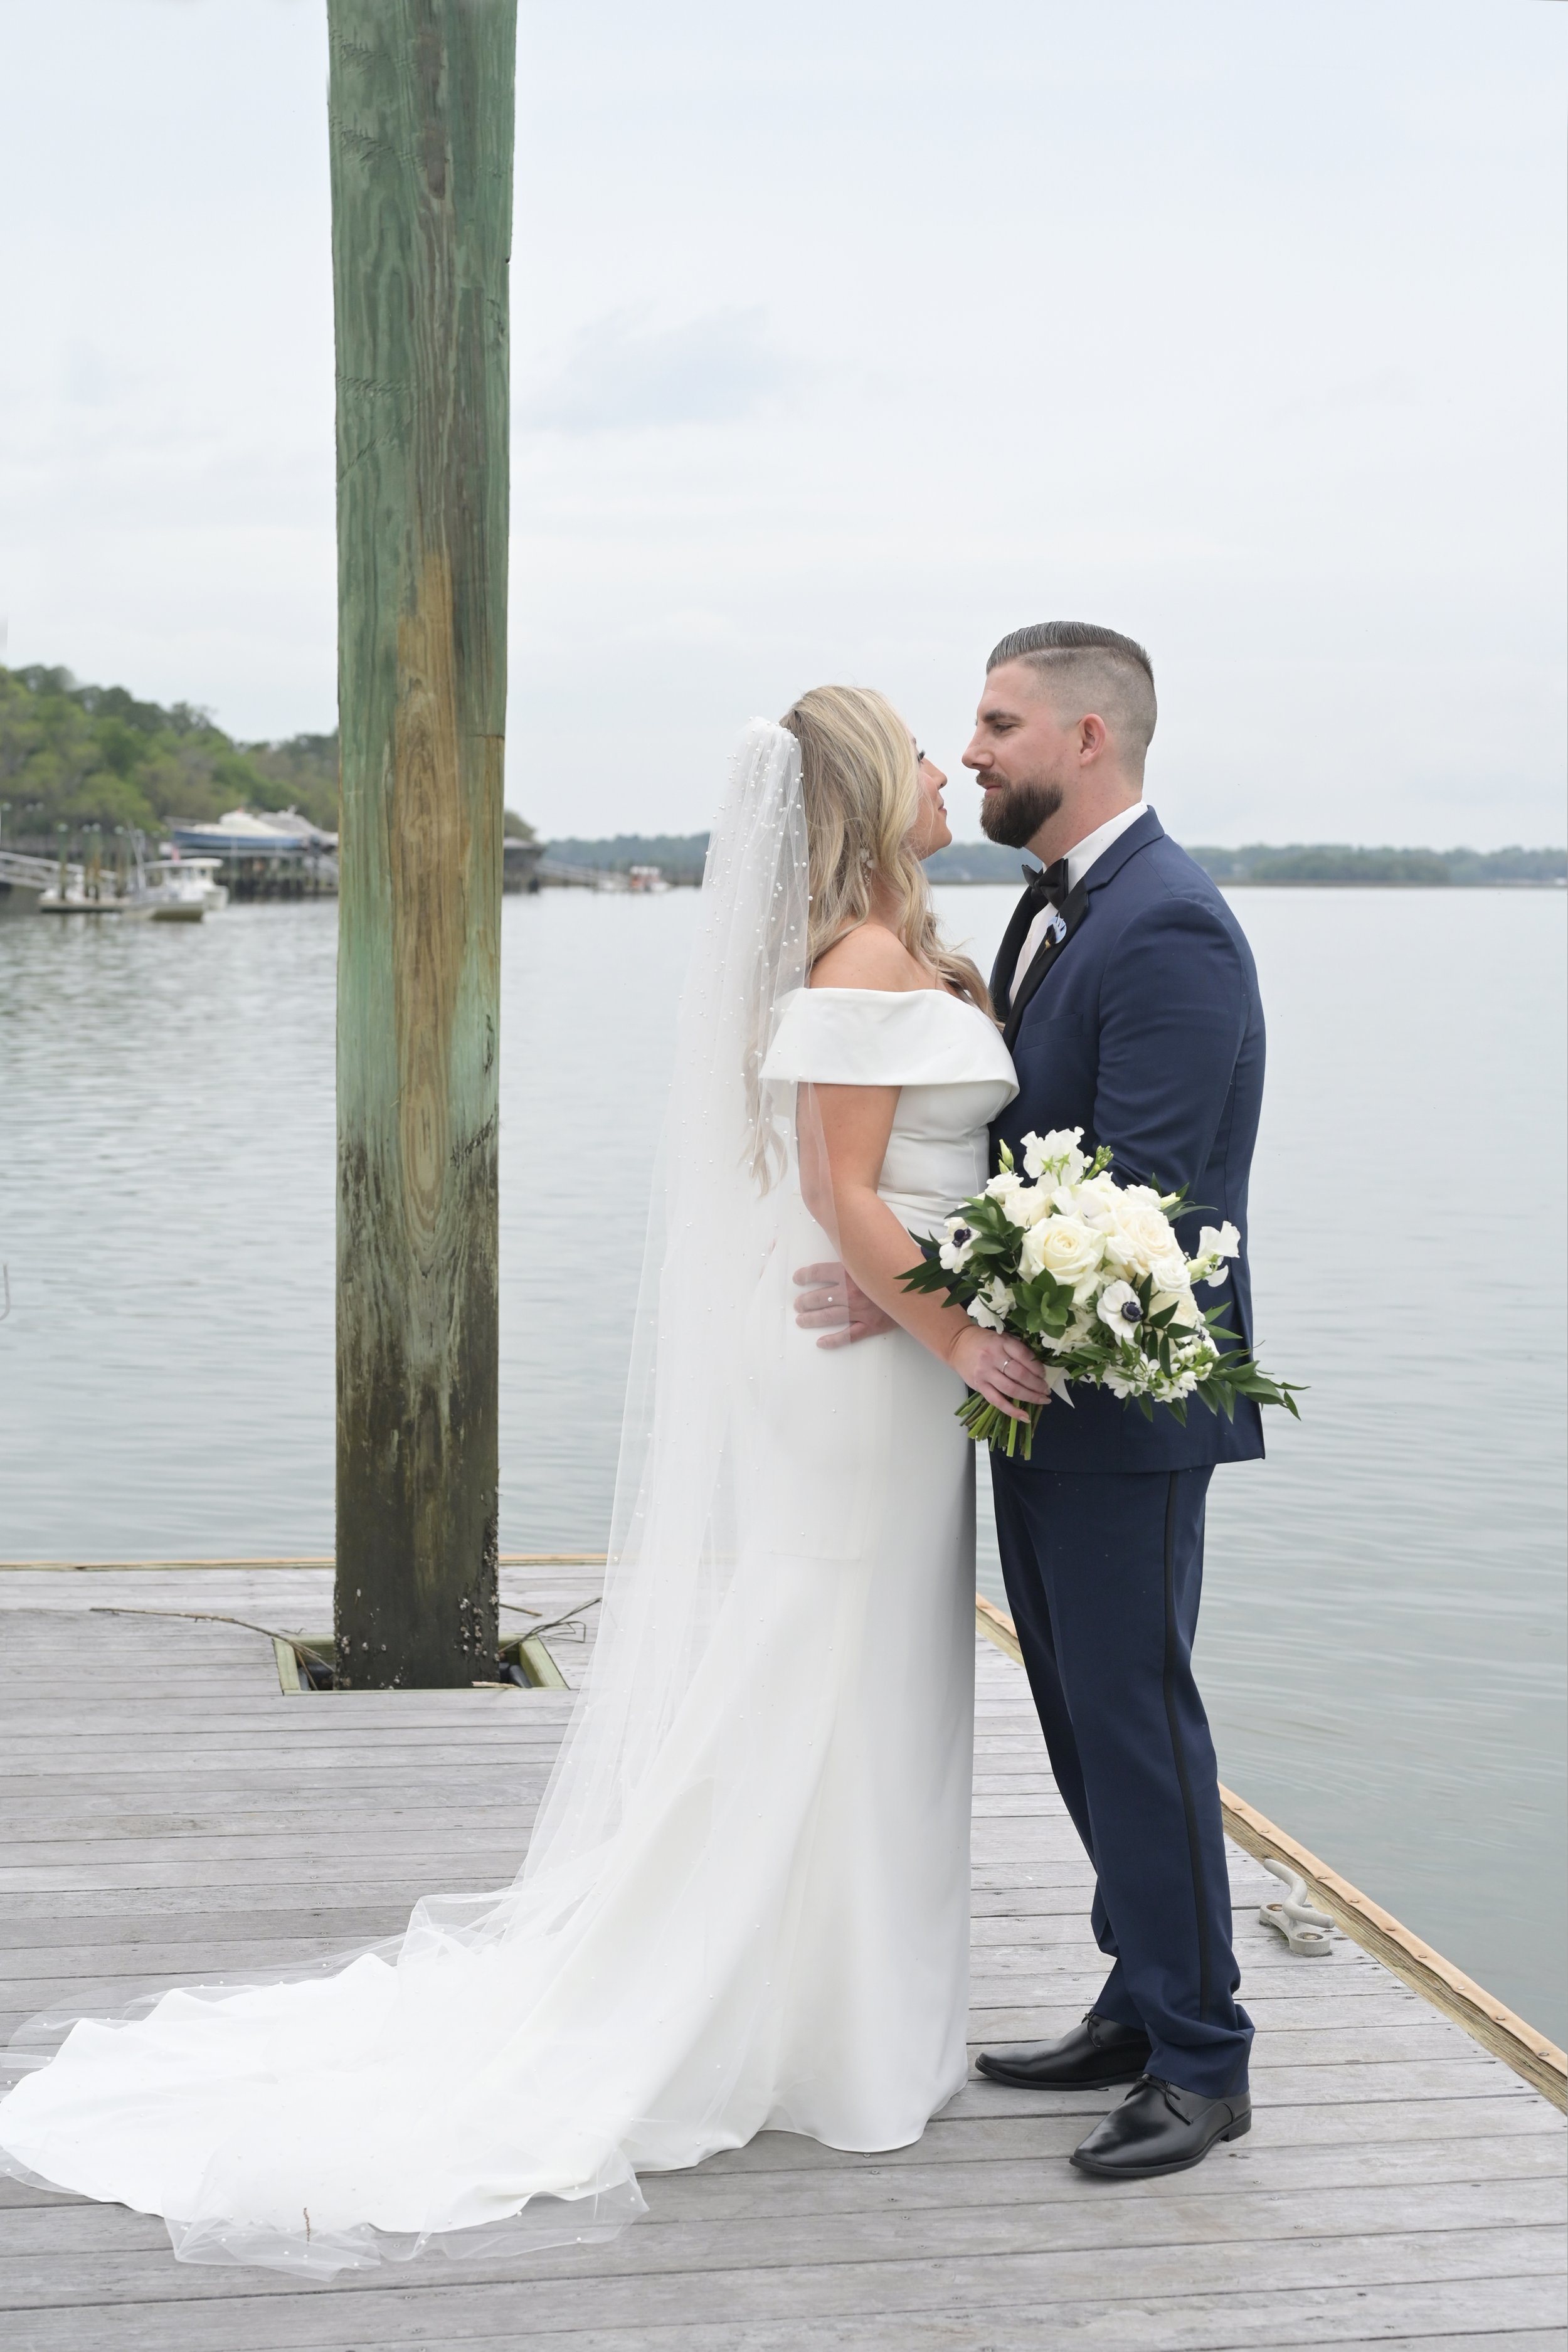 real-savanna-bride-in-the-lottie-gown-by-made-wth-love-purchased-from-savannah-bridal-shop-ivory-and-beau-savannah-bridal-boutique-savannah-wedding-gowns-savannah-wedding-dresses-7.JPG